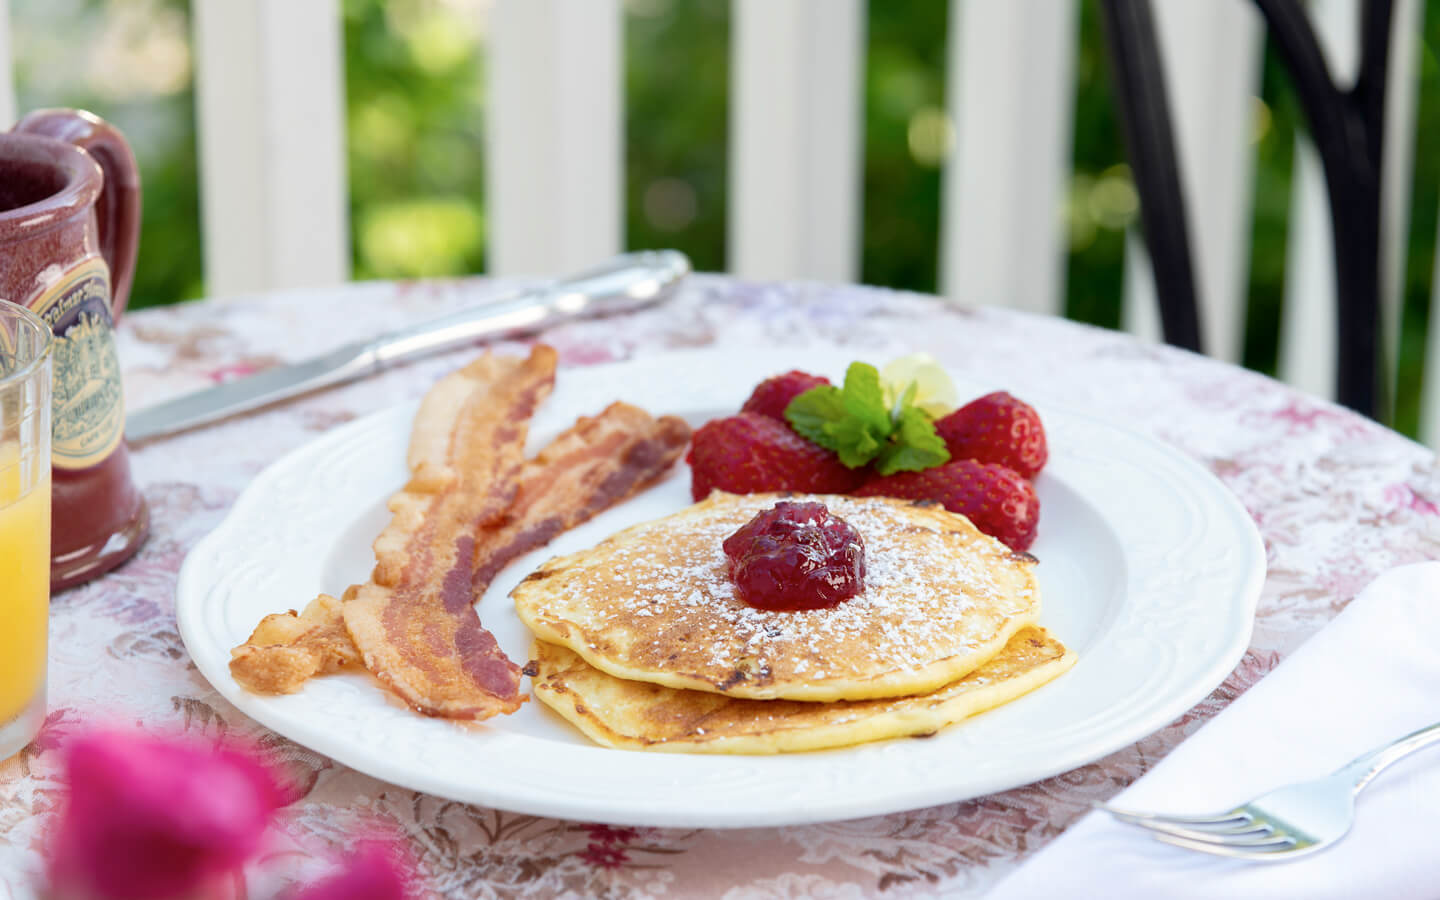 Pancakes with bacon and strawberriesat outside table